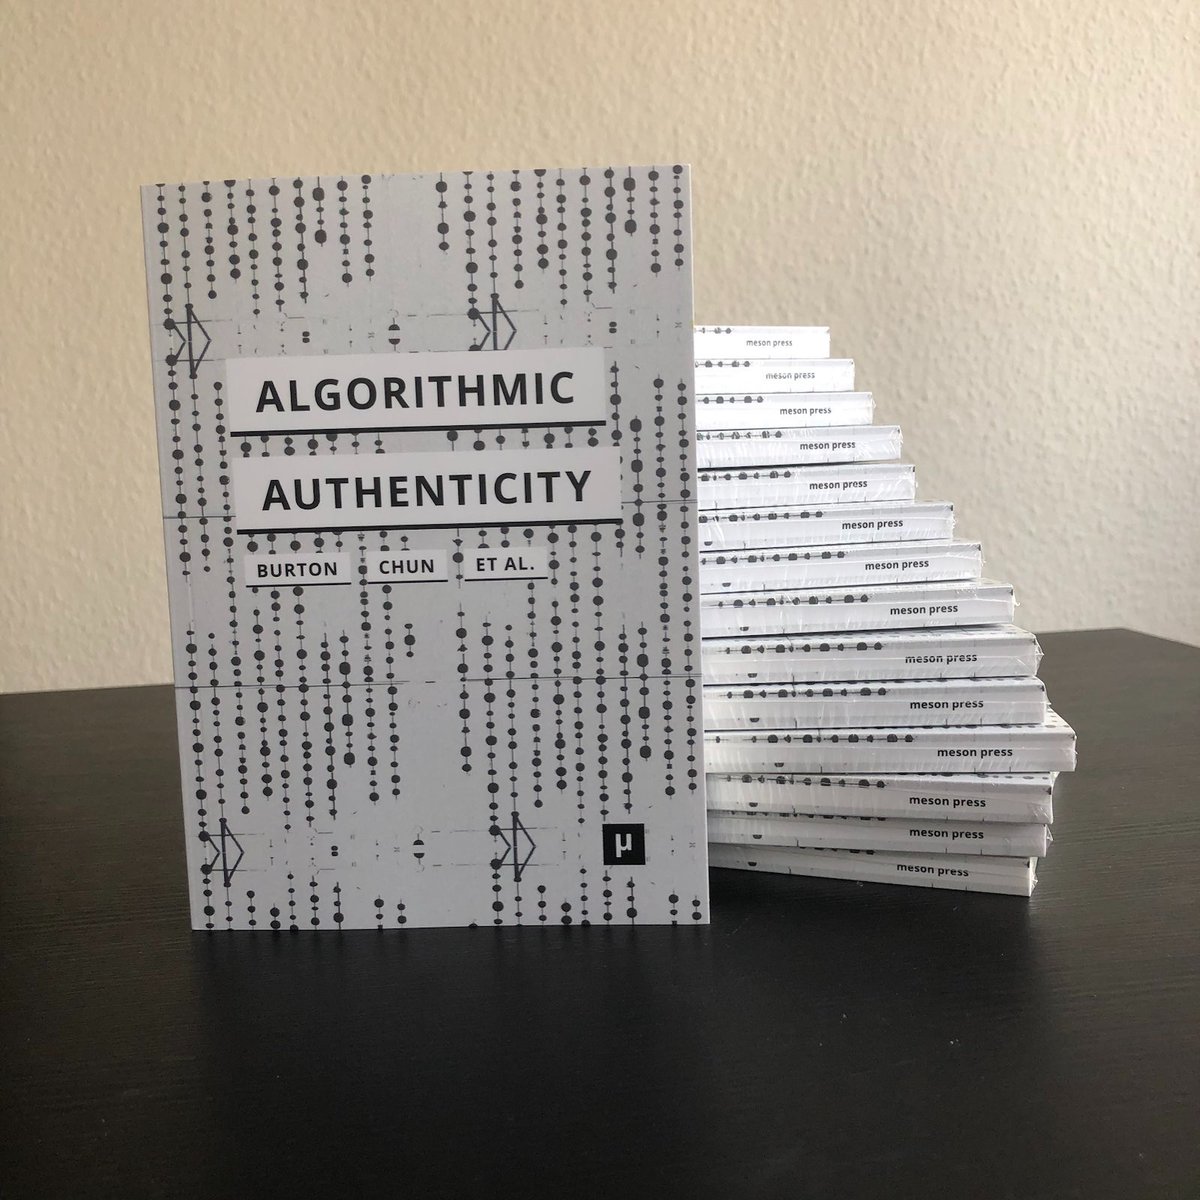 What makes information feel true or compelling in our contemporary digital societies❓Check out ALGORITHMIC AUTHENTICITY, ed. by @anthbrtn, @whkchun & others. Now in bookstores and - as always with meson press - available online in #openaccess. meson.press/books/algorith… @ScholarLed